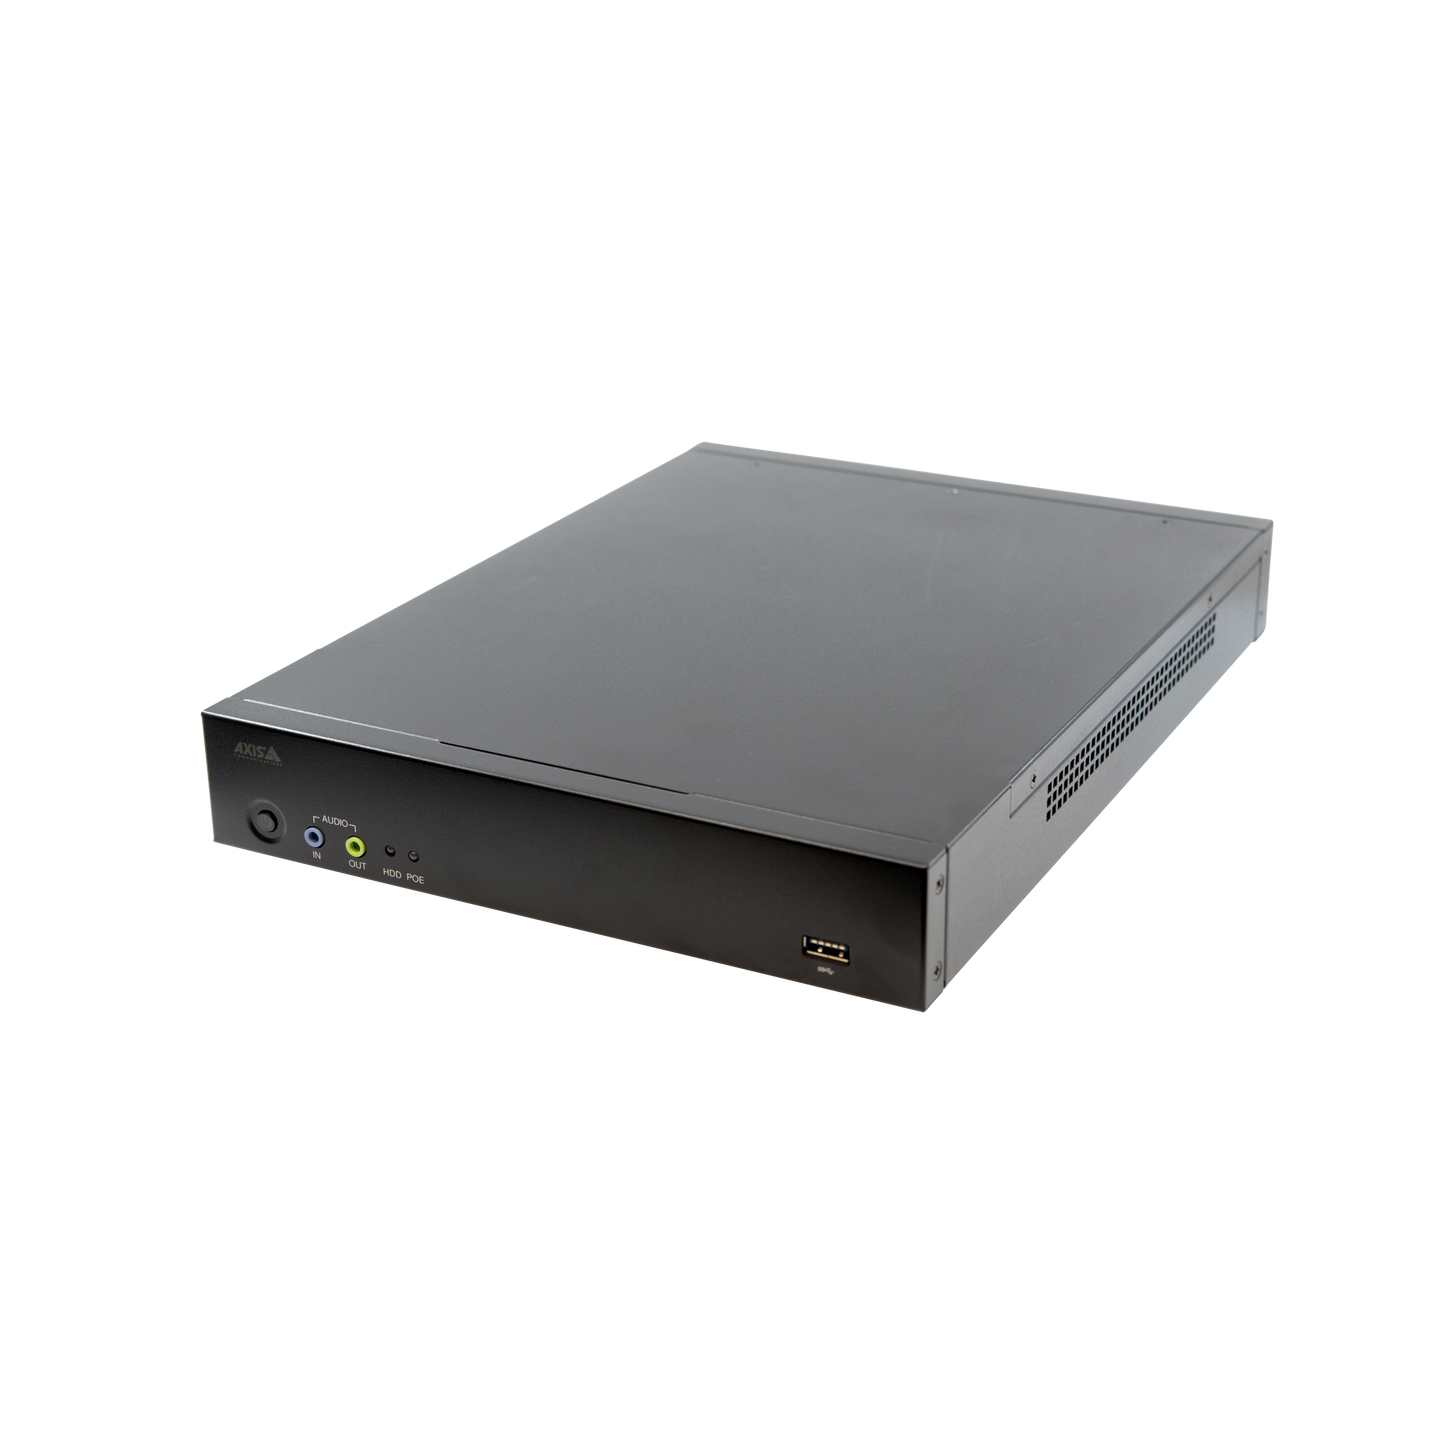 AXIS S2108 Appliance is an affordable, all-in-one appliance including a VMS client/server, storage, and an integrated PoE switch